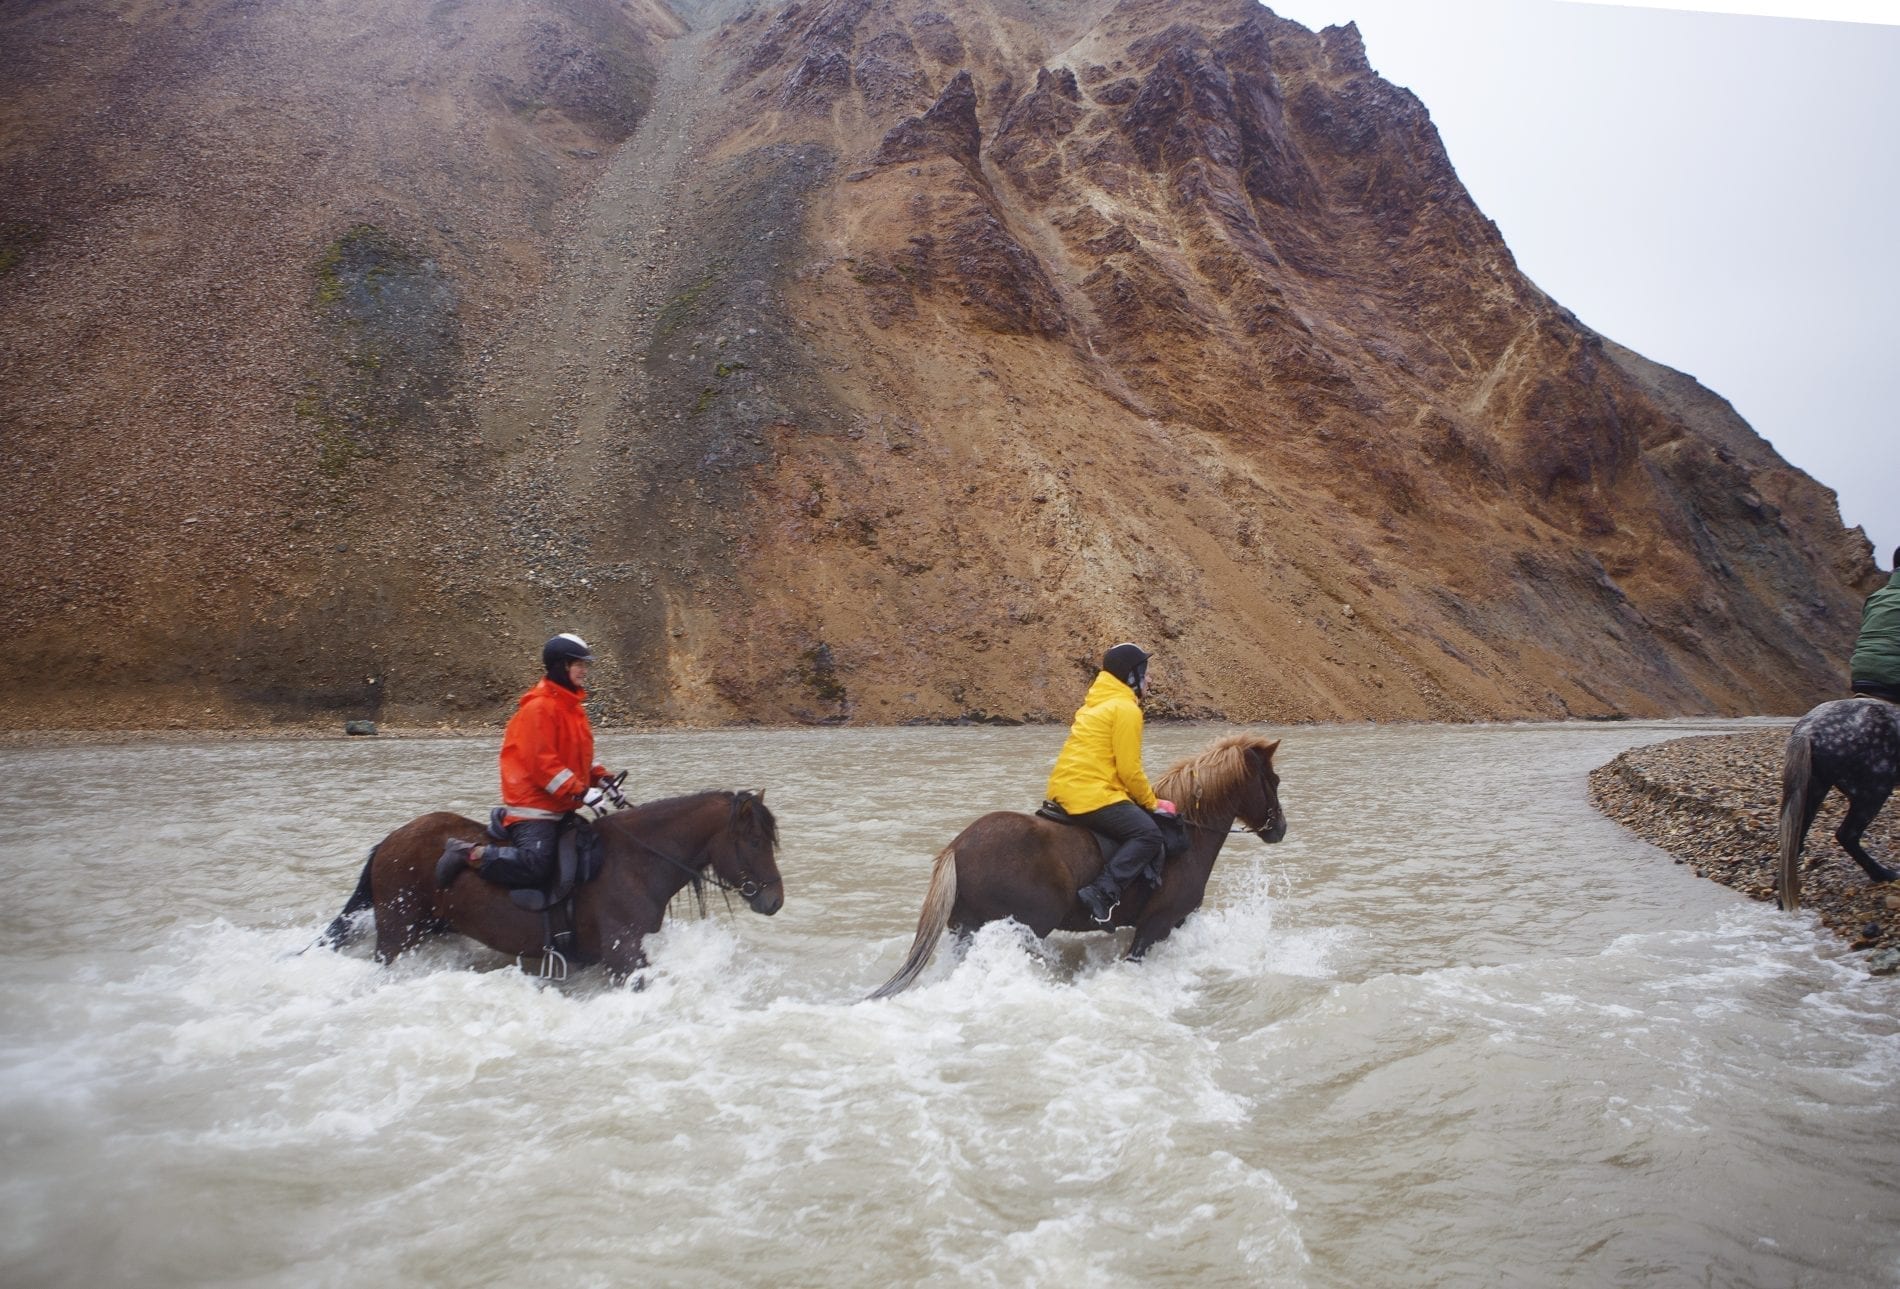 horse riding through a river full of water